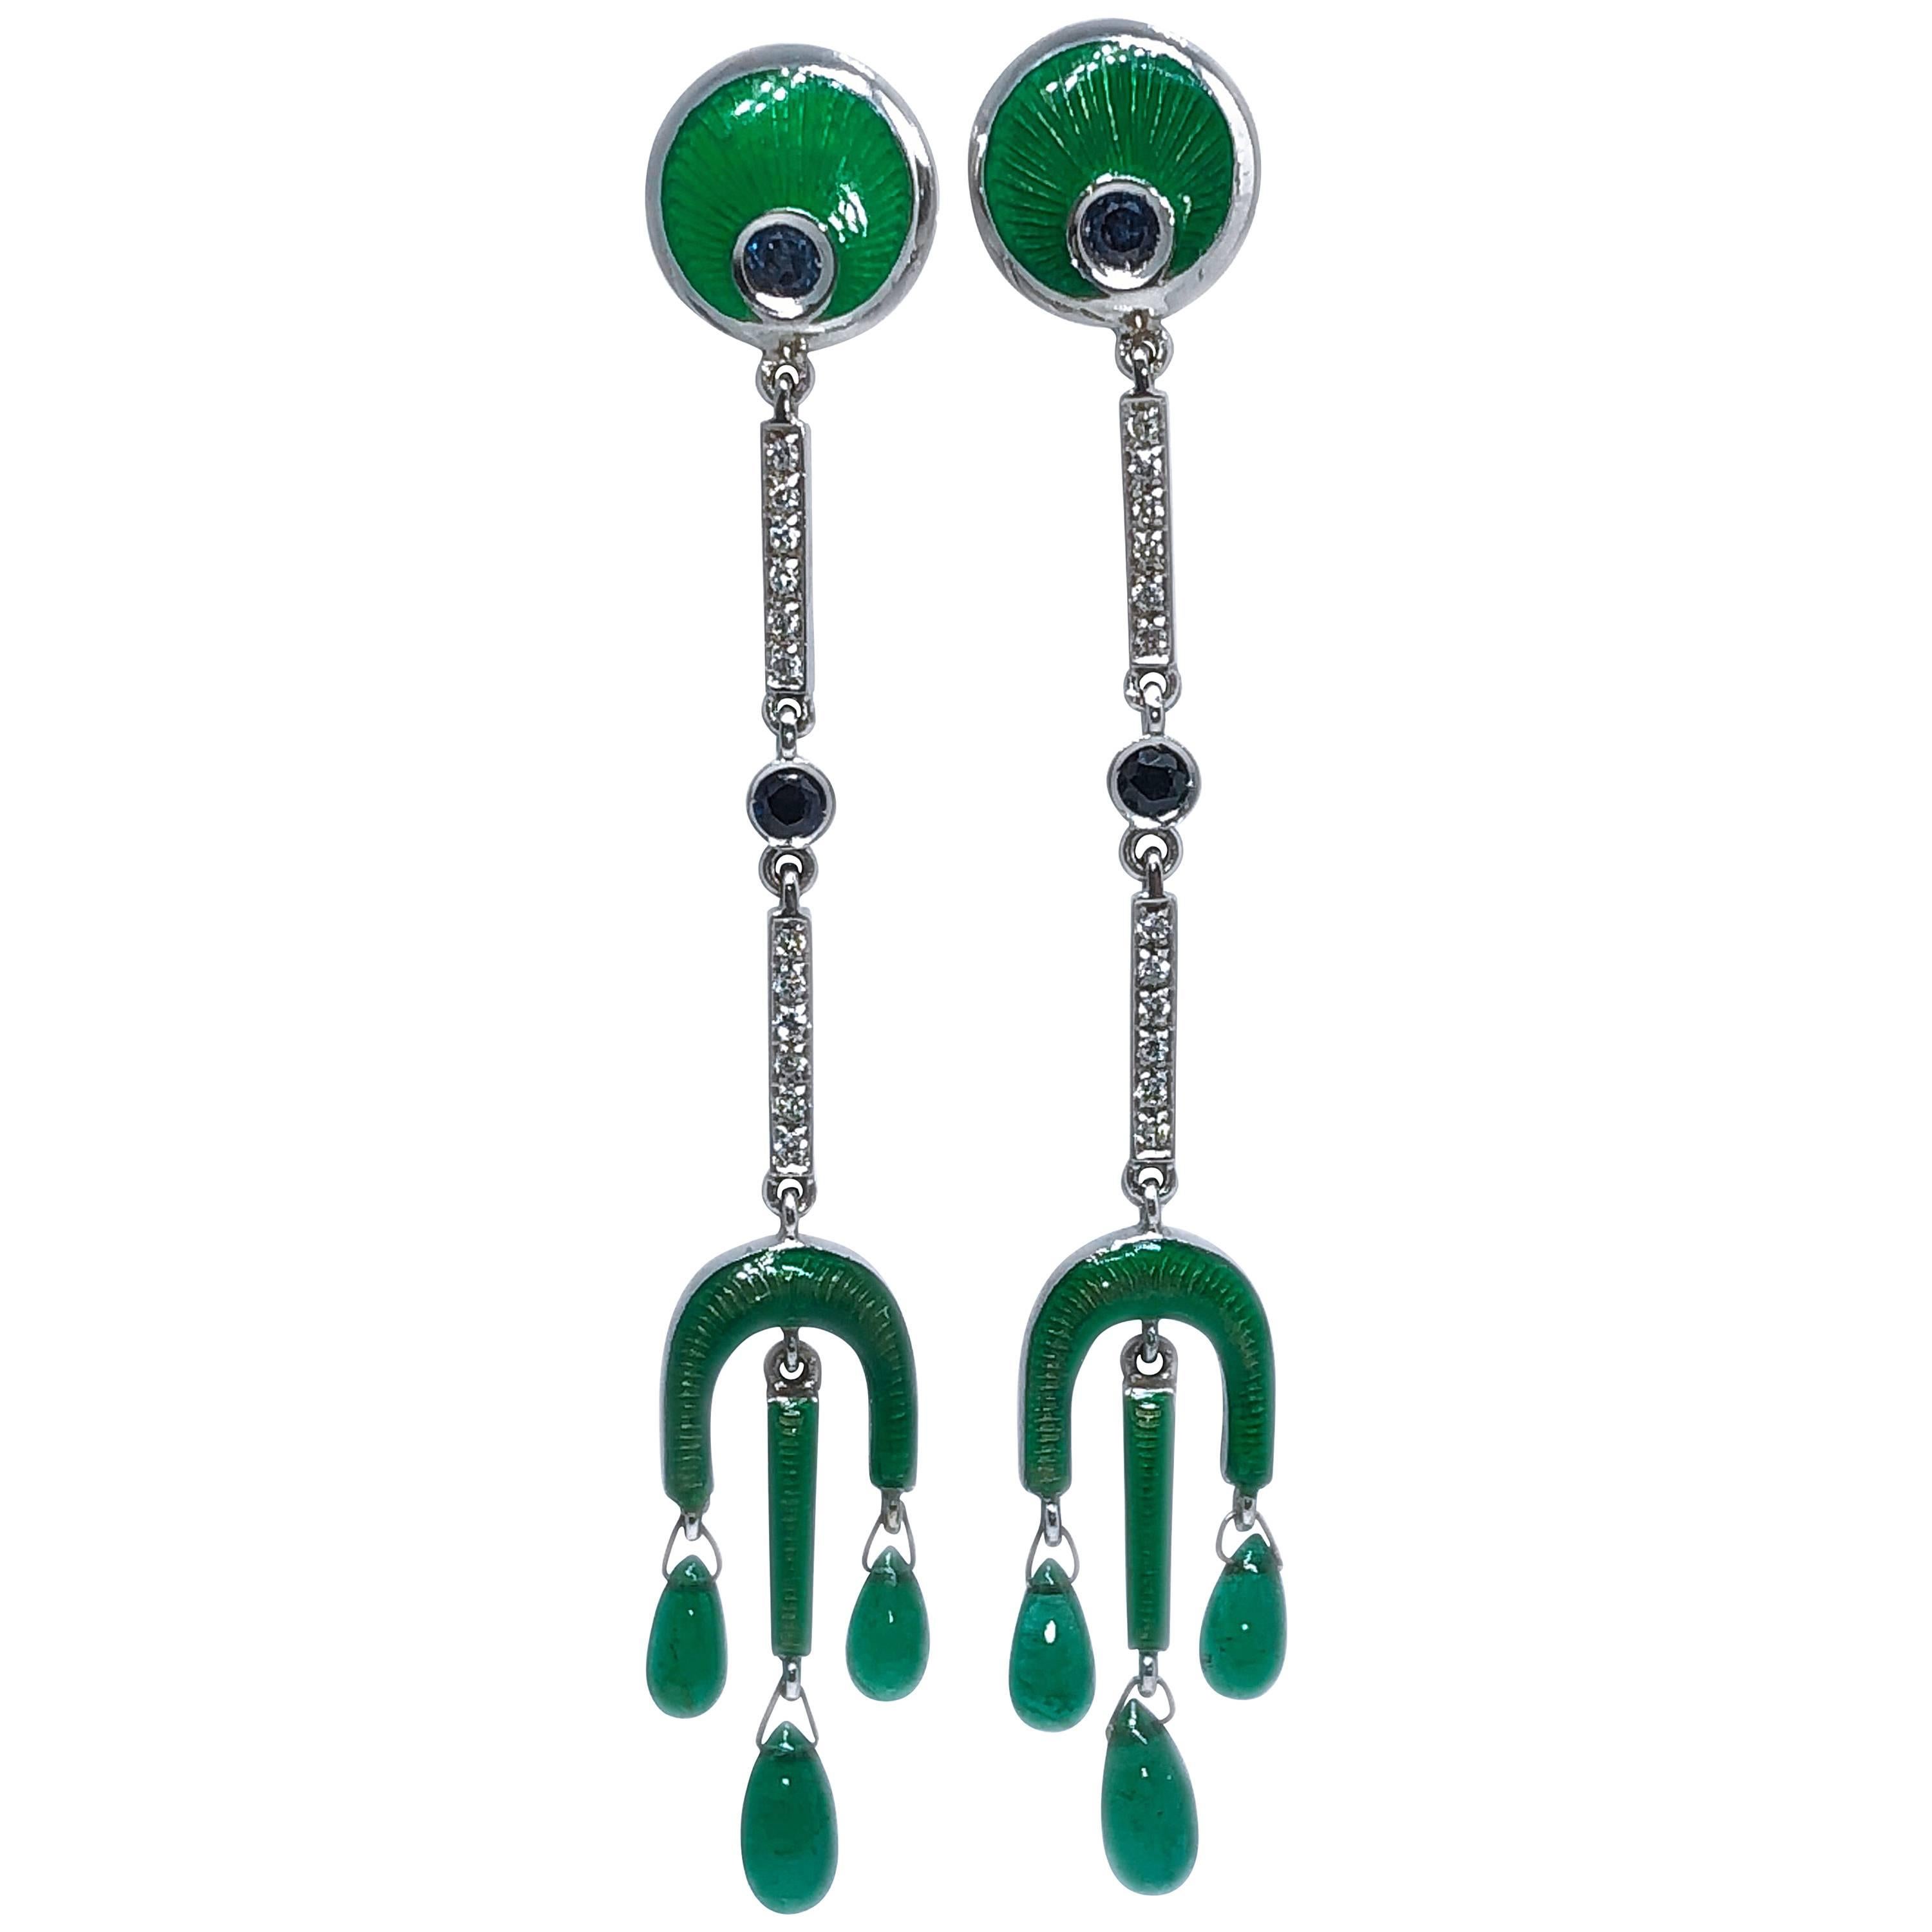 Chic, yet Timeless, One-of-a-kind Drop Emerald Earrings, Hand Enamelled with the antique champlevé technique featuring 0.55 Carat round Blue Sapphire, 3.80 Carat Emerald Drops 0.24 Carat White Diamond, 18k White Gold Setting.
Lenght 2.95 inches,